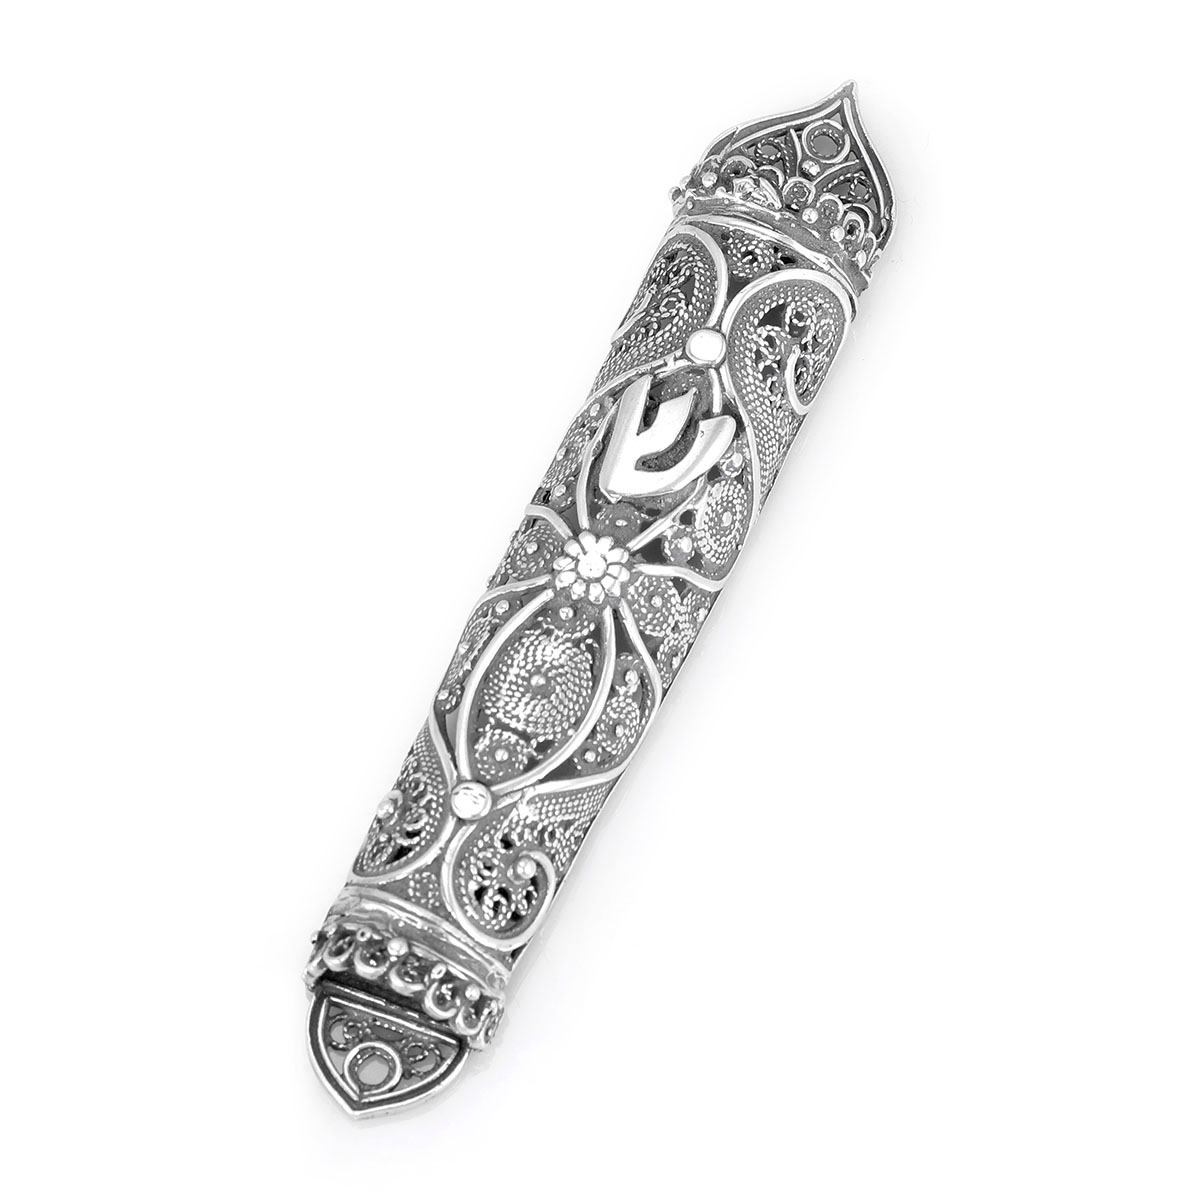 Traditional Yemenite Art Luxurious Handcrafted Sterling Silver Mezuzah Case With Filigree Design - 1